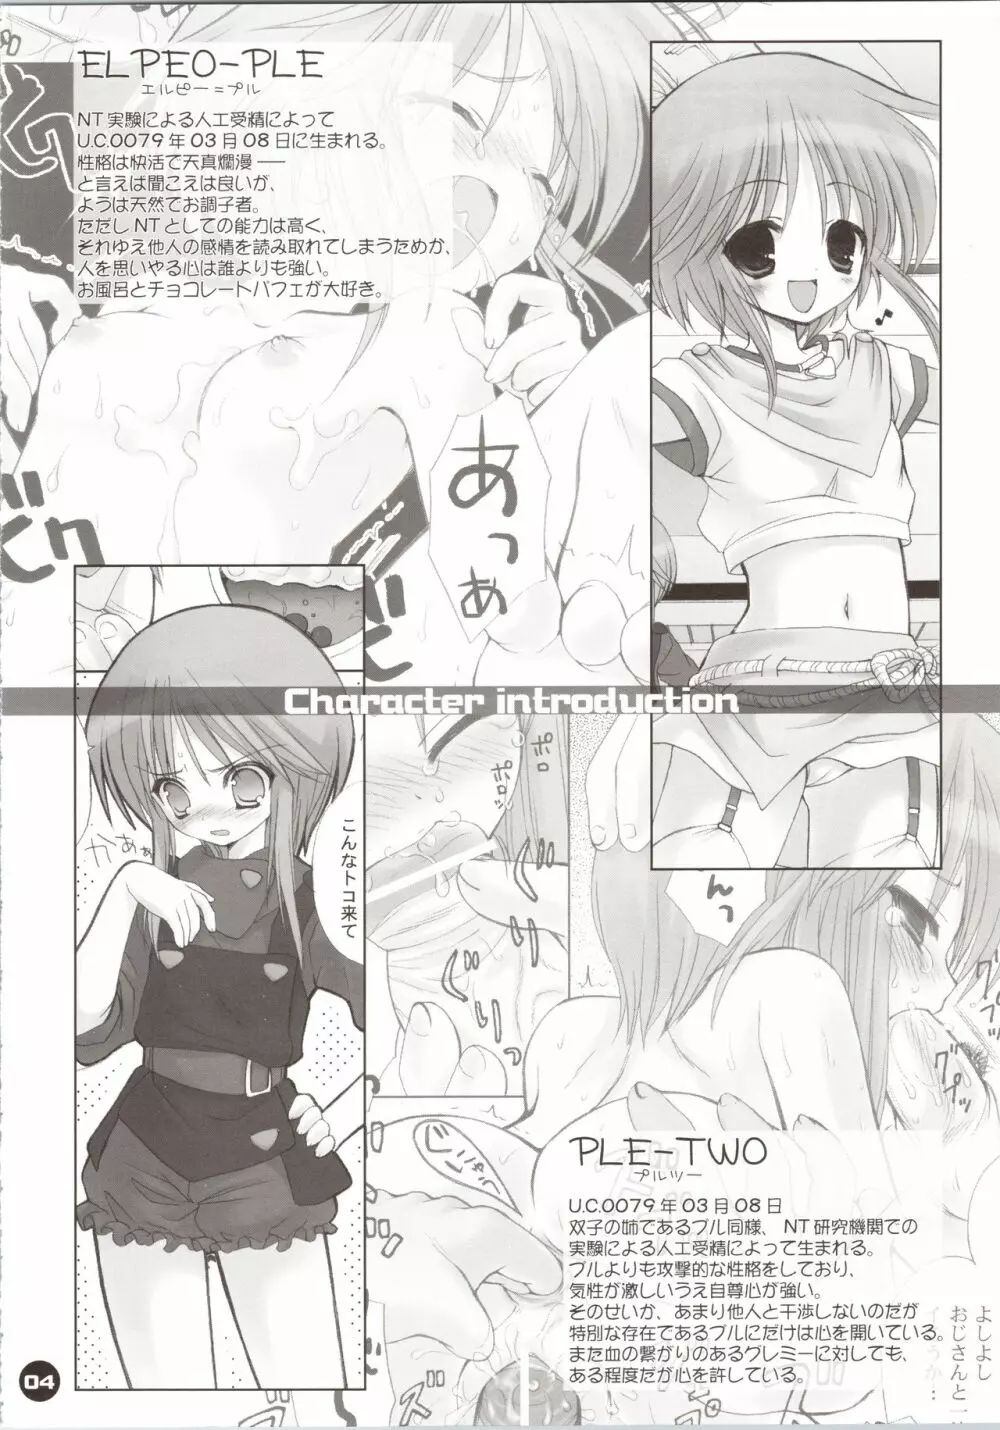 ELPEO-PLE GENERATION EVENT LIMITED EDITION - page10